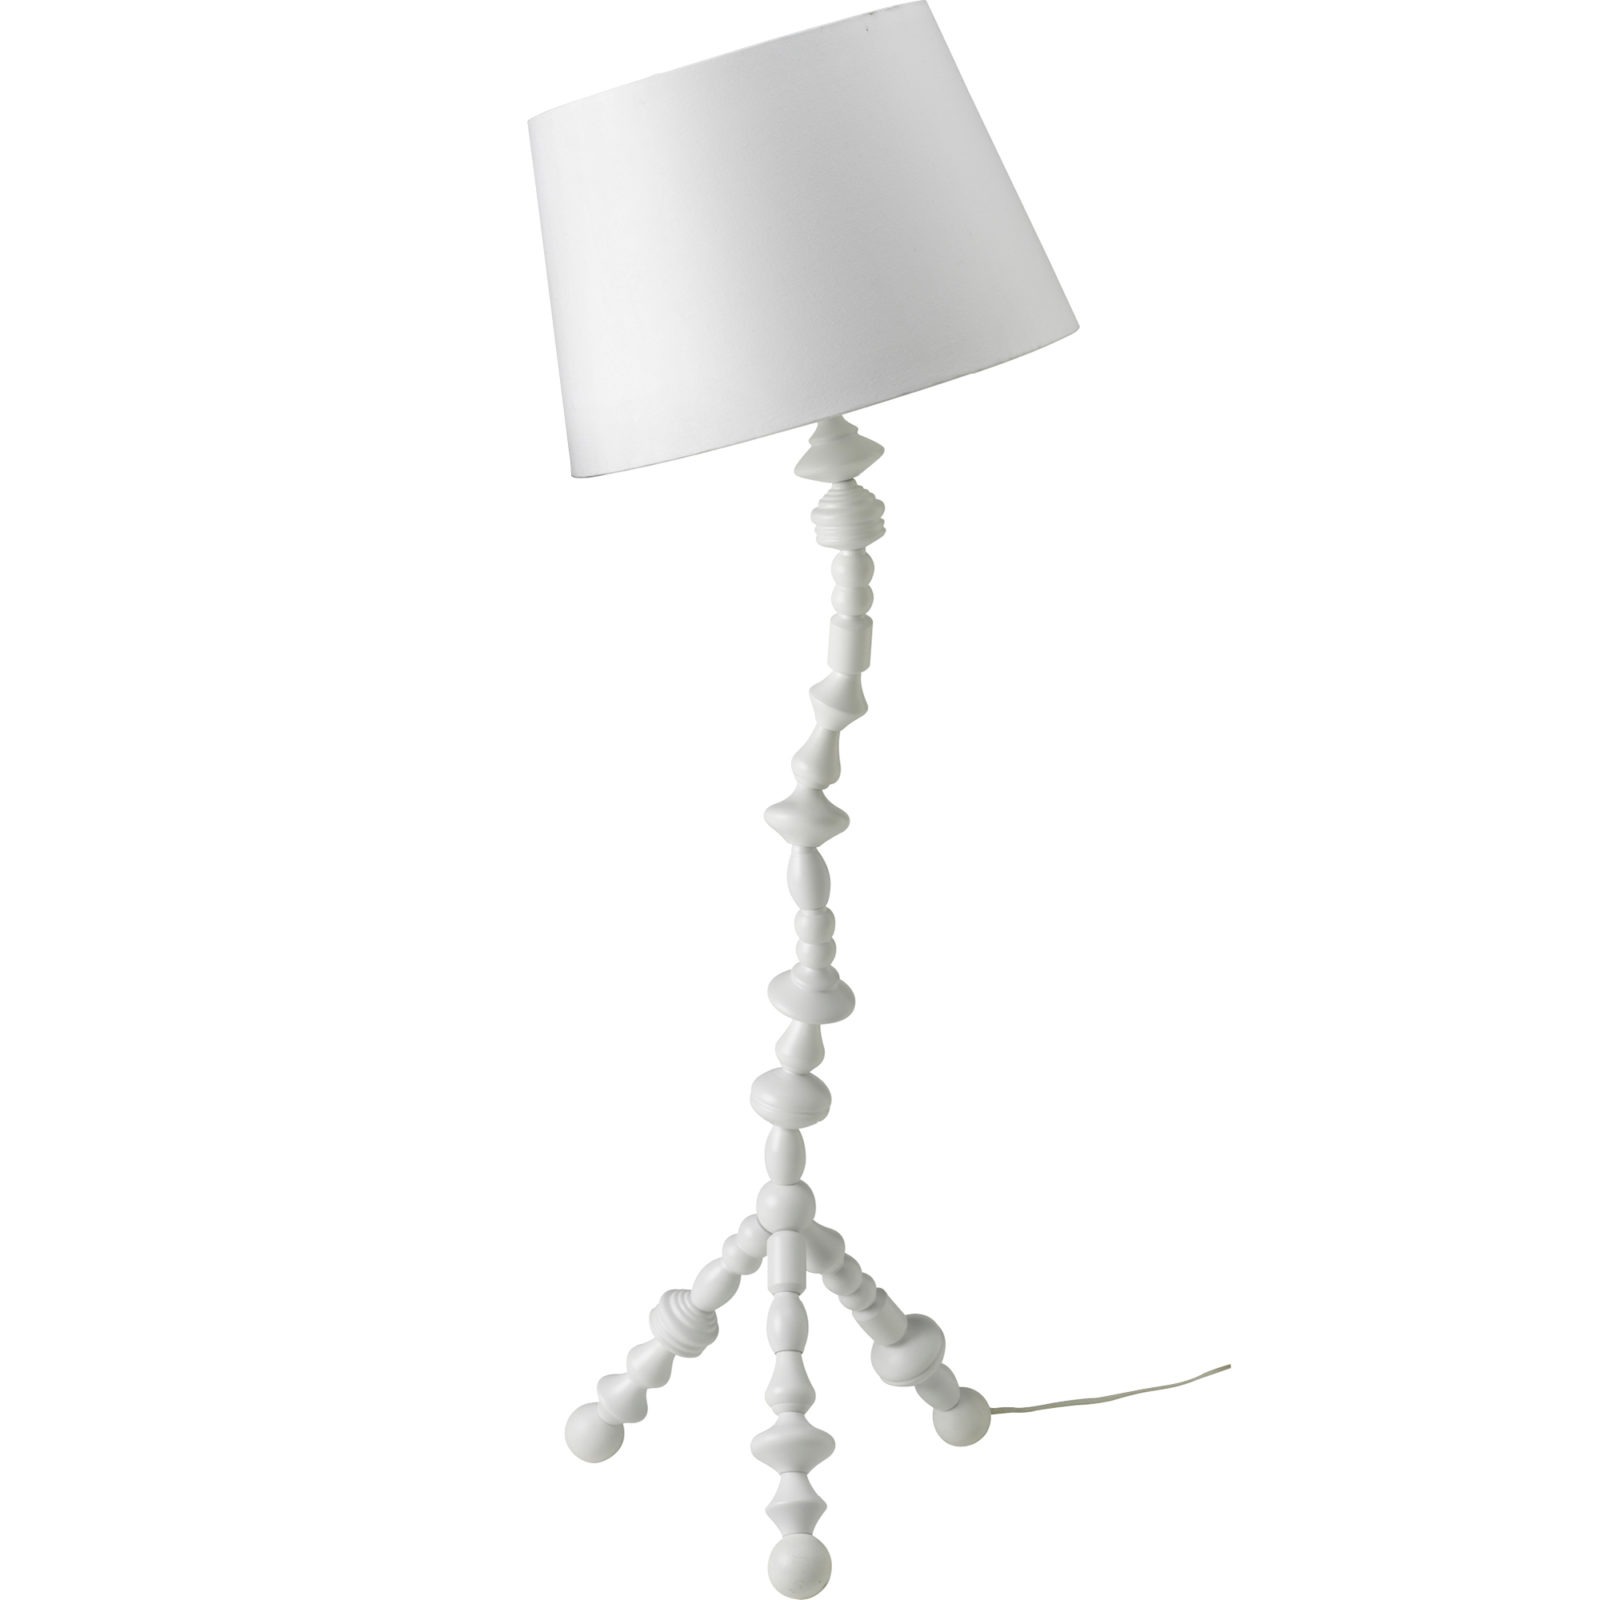 A twisted floor lamp made of turned wooden poles with a white lamp shade, IKEA PS SVARVA.